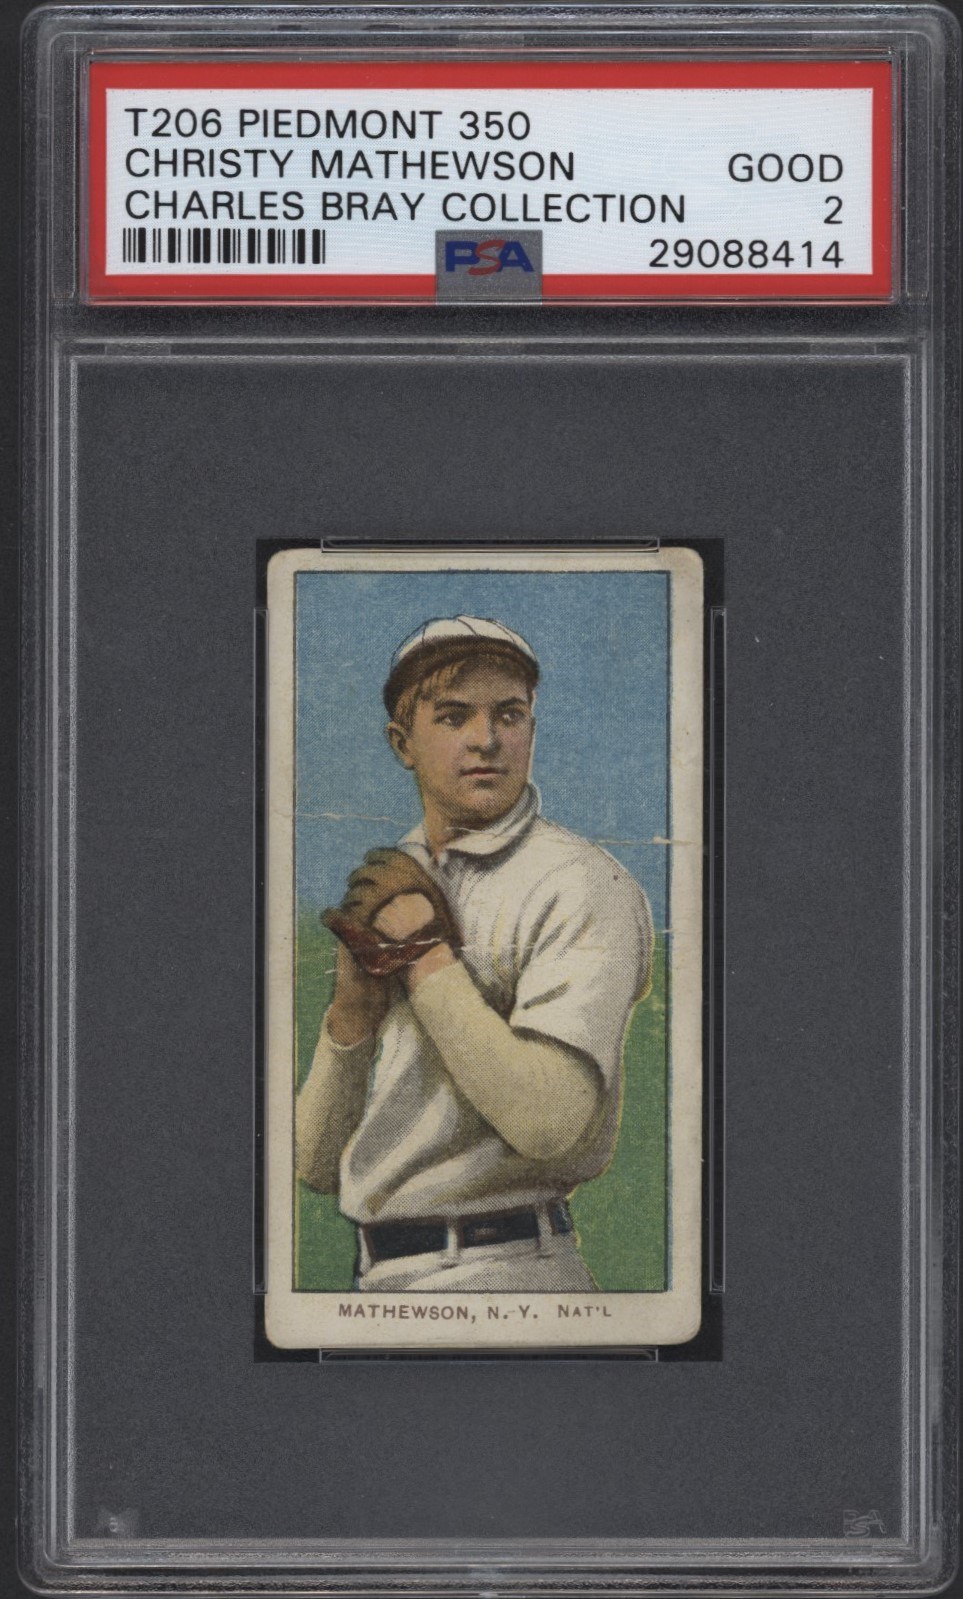 T206 Piedmont 350 Christy Mathewson PSA 2 From the Charles Bray Collection